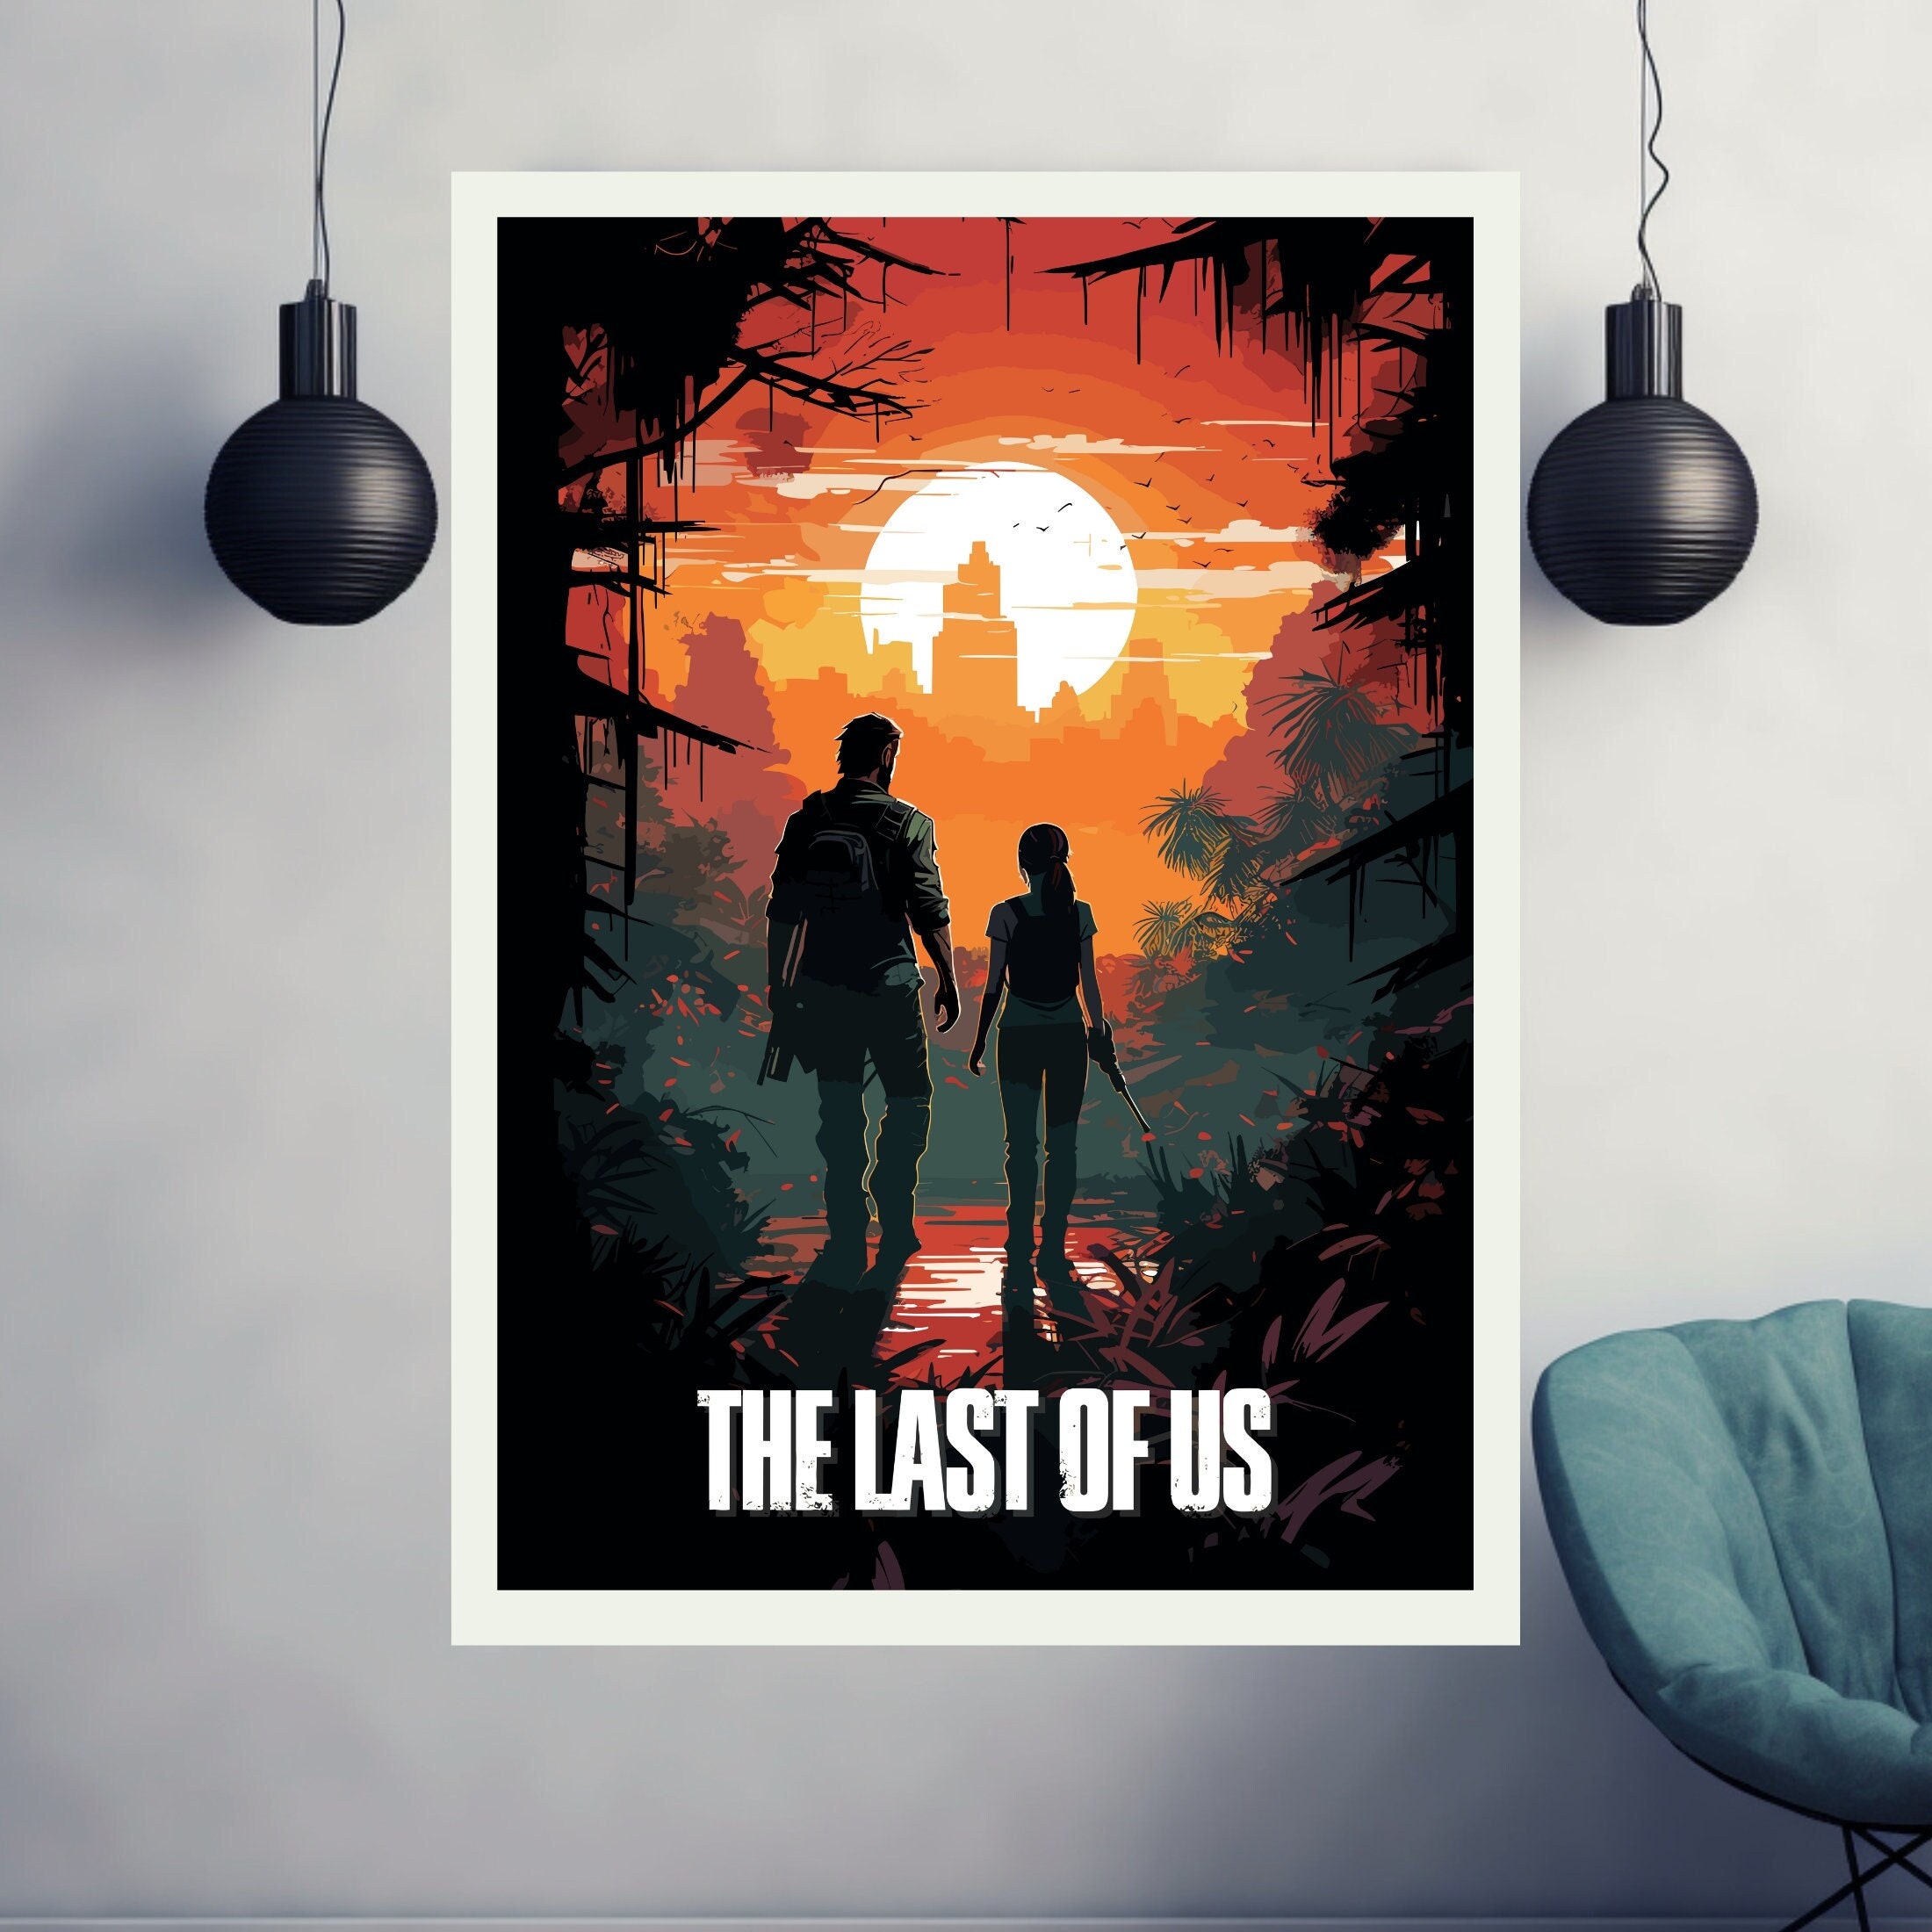 Ellie's Tattoo The Last of Us Poster for Sale by Sanfox55